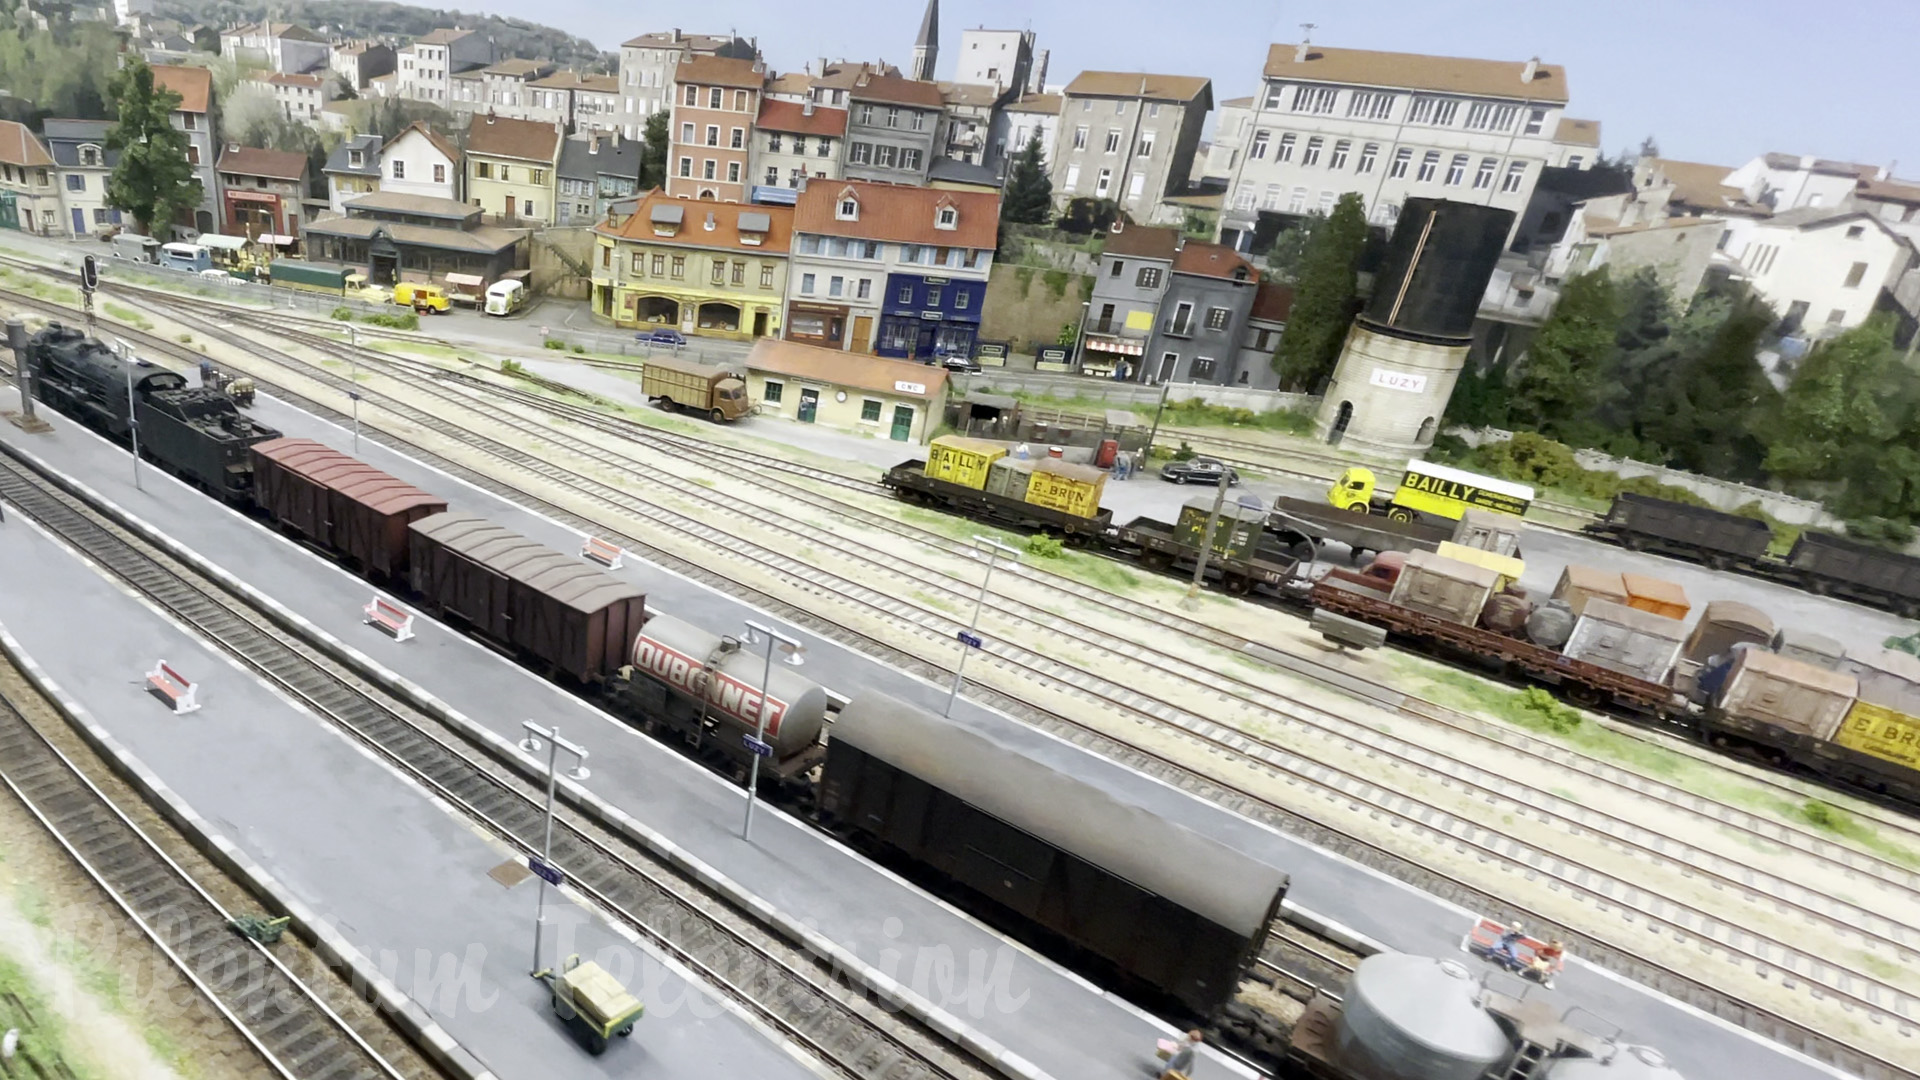 One of the most beautiful and largest model railways in France - Renaud Yver 's HO scale MRR layout